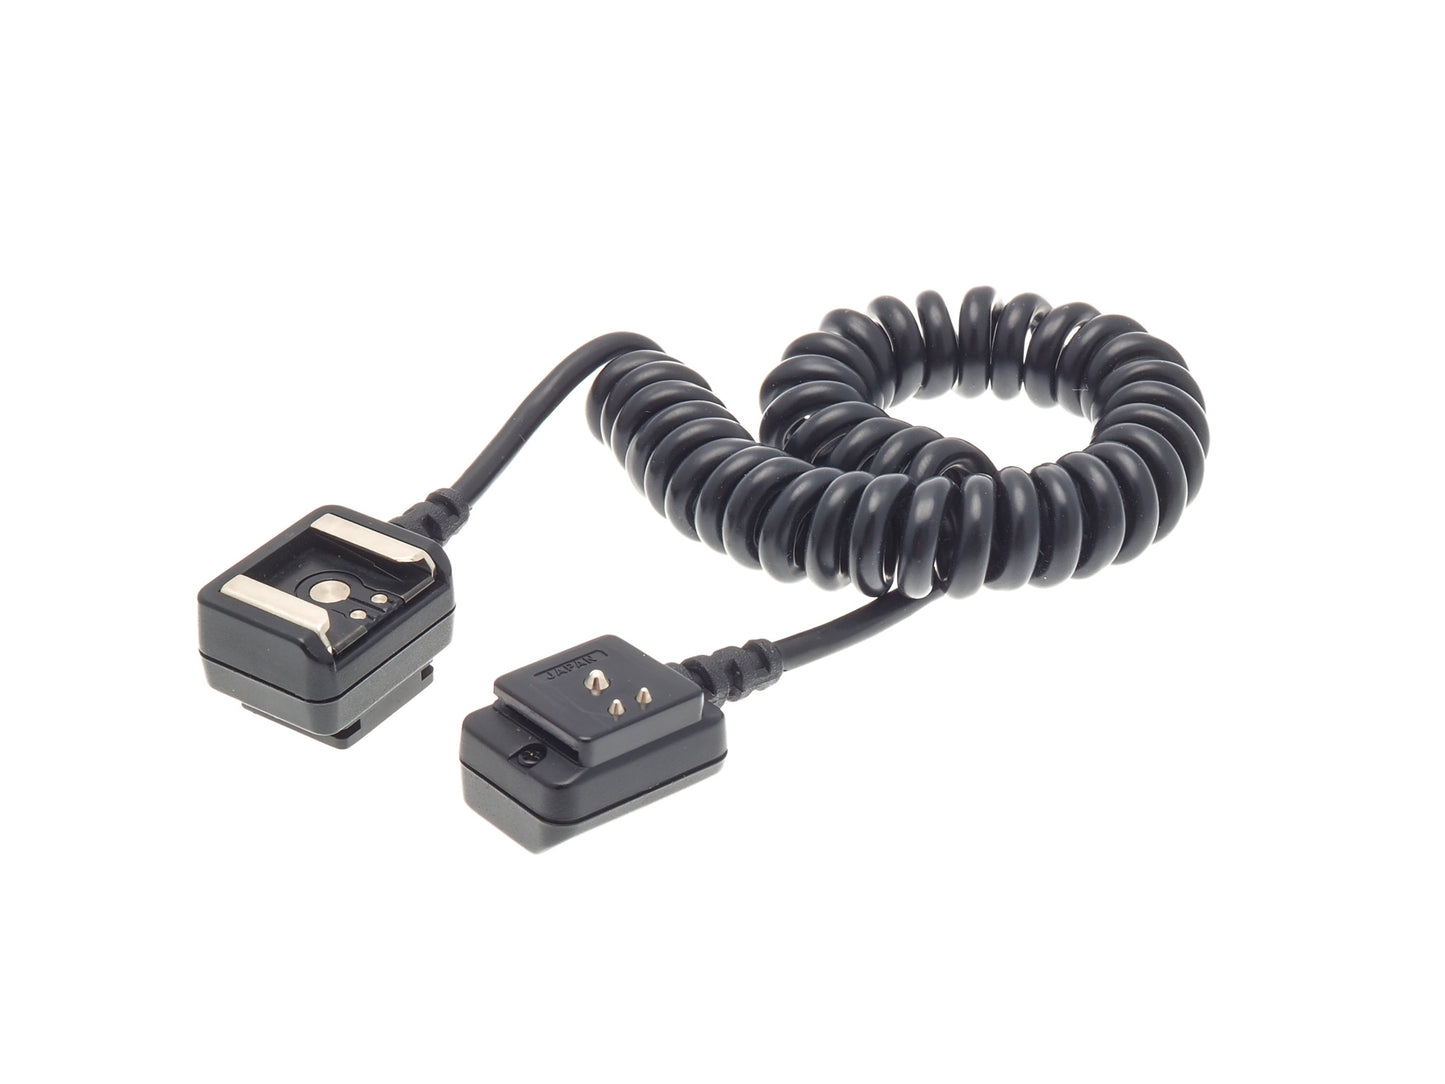 Contax TTL Hot Shoe Extension Cord - Accessory